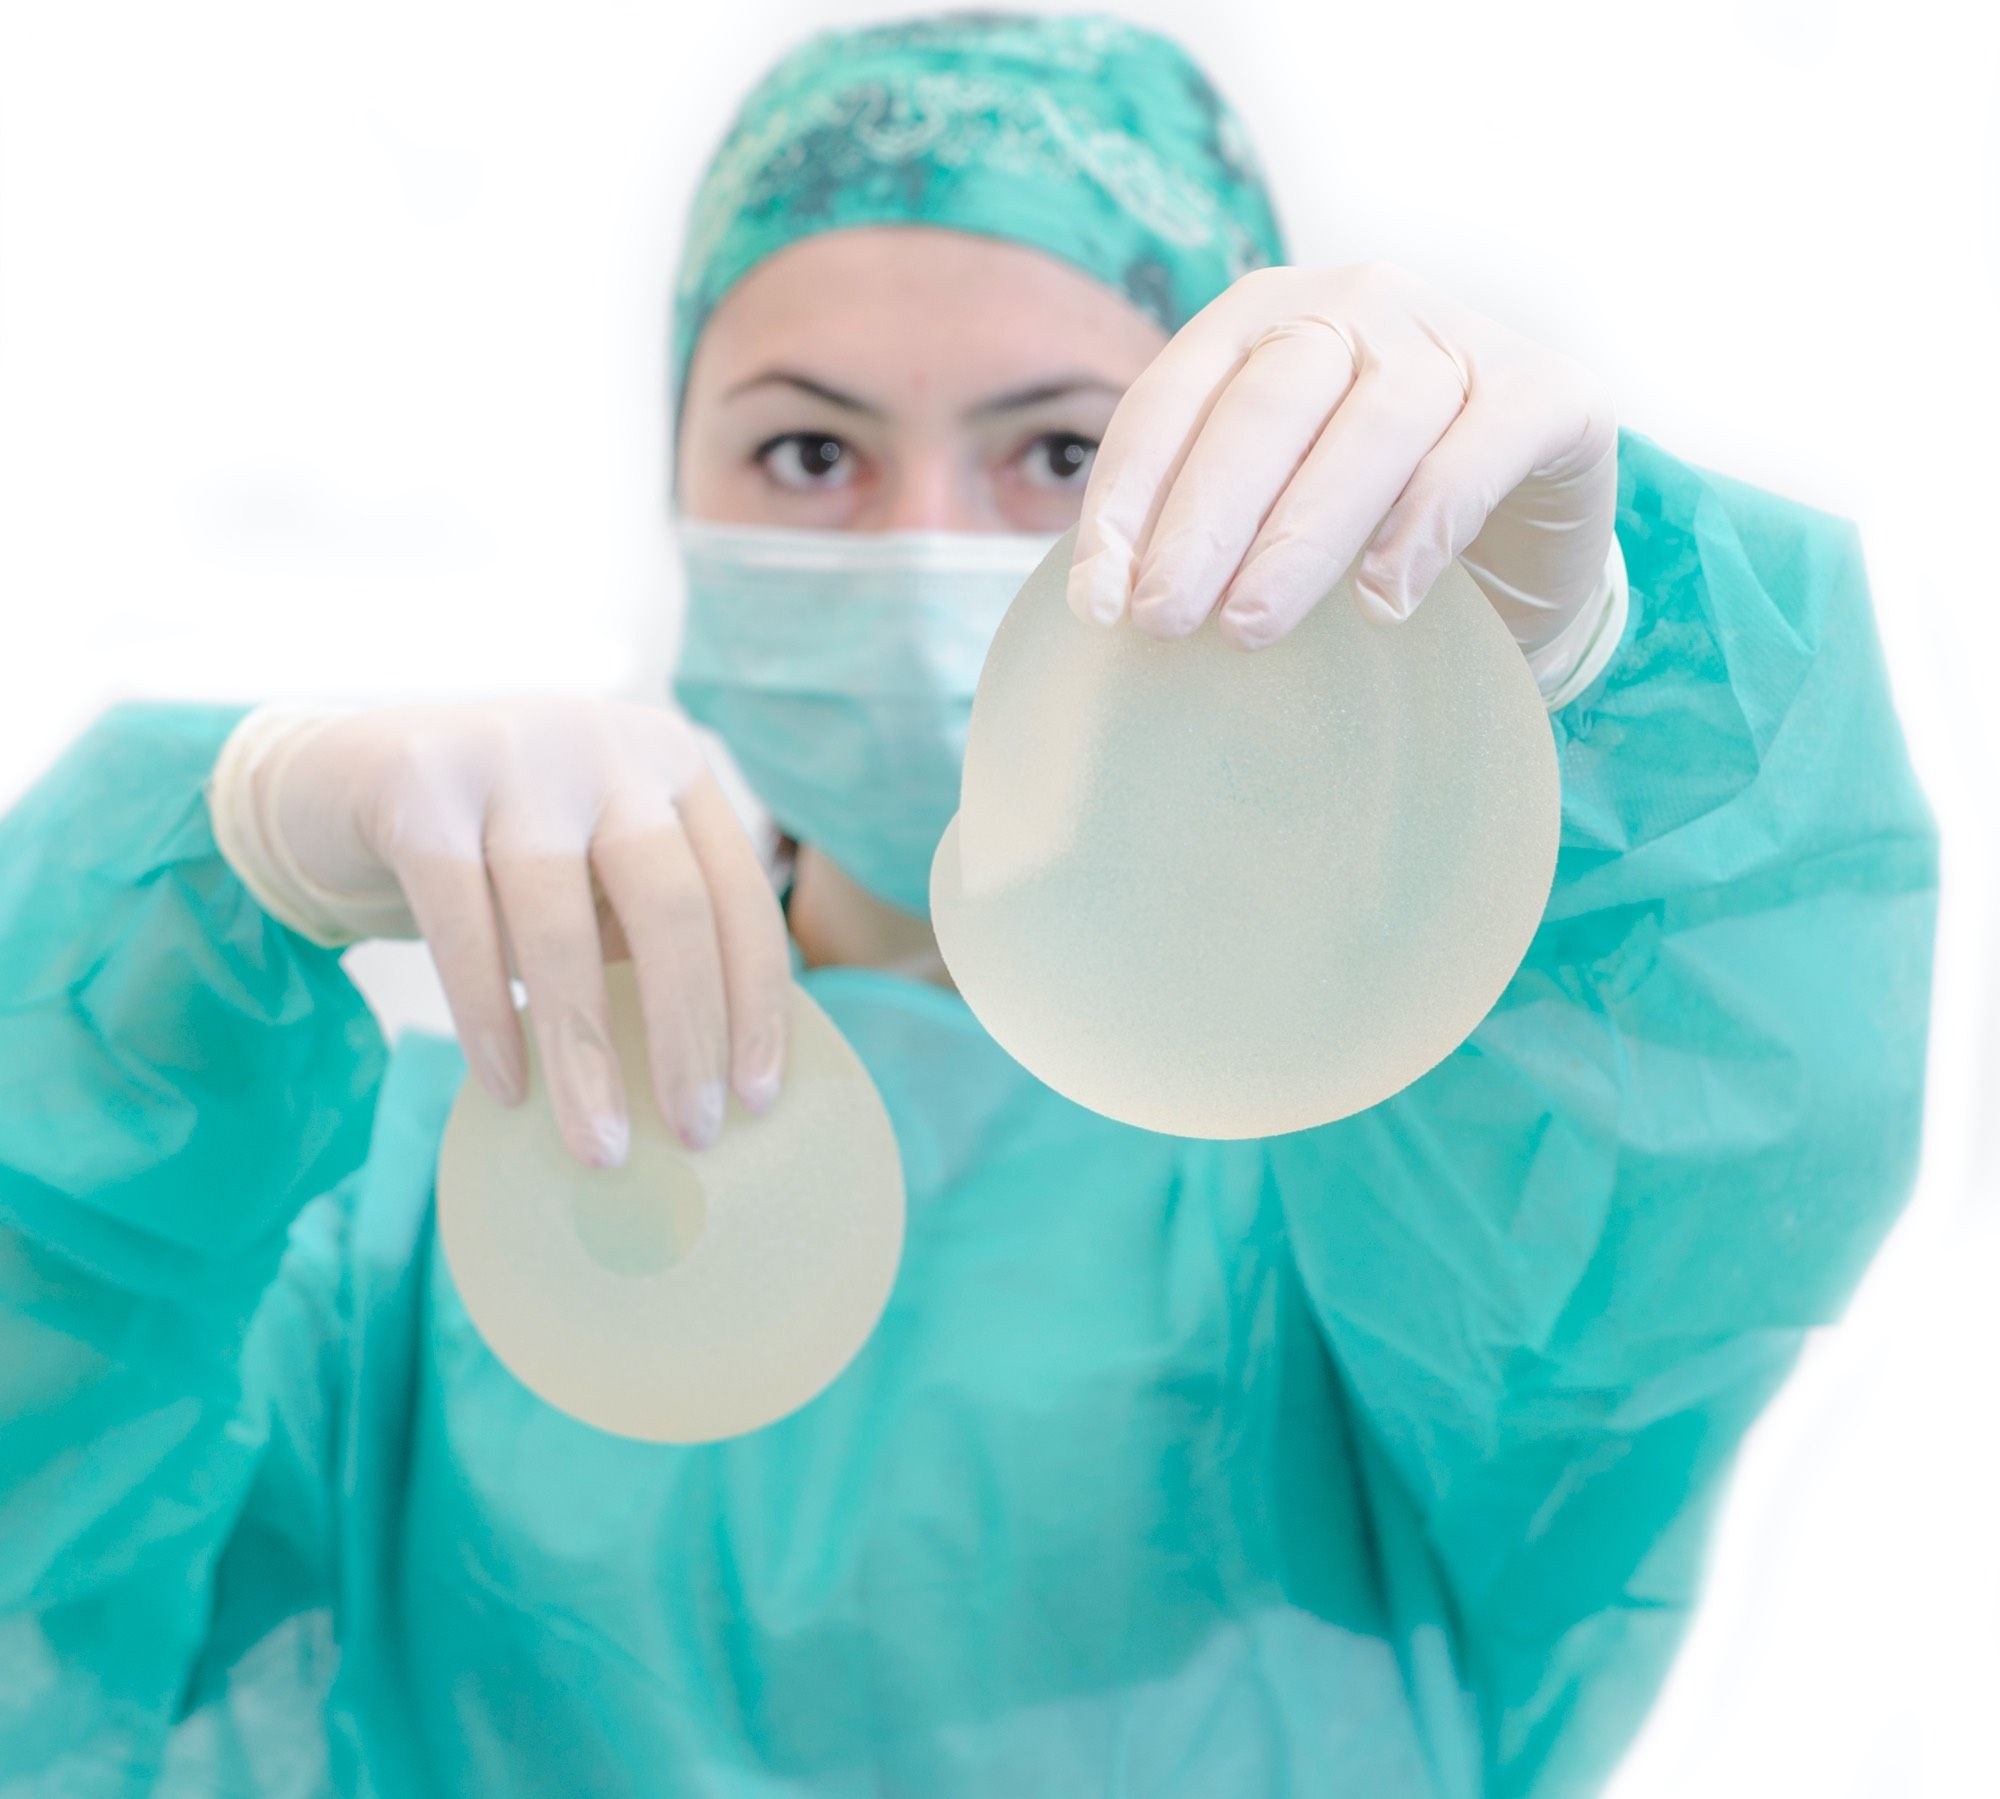 Doctor in scrubs holds out two different sizes of breast implants